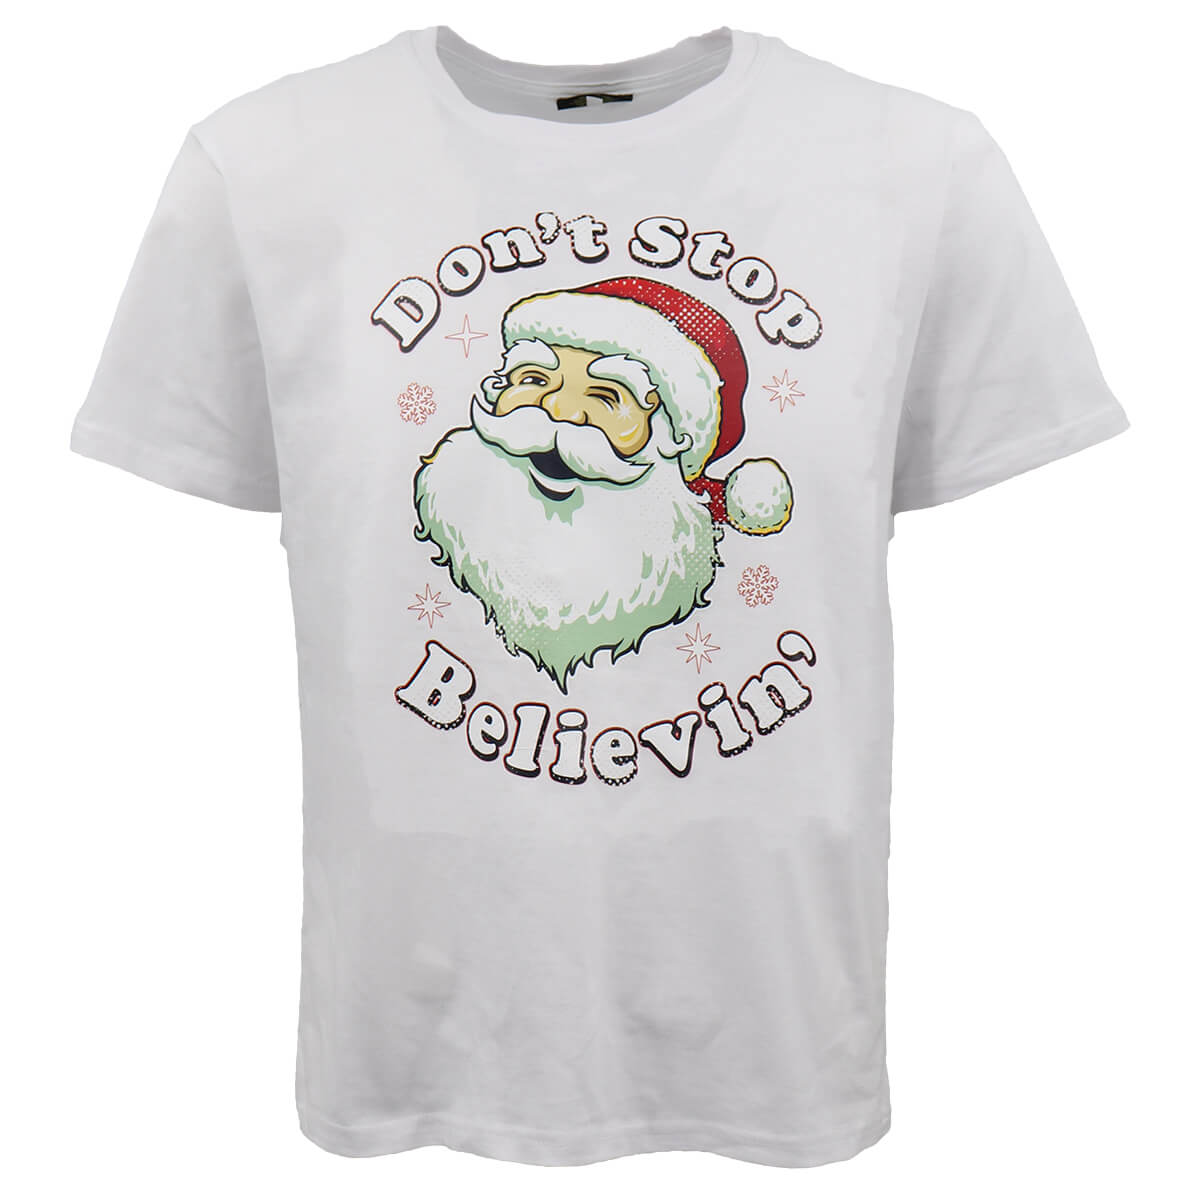 New Funny Adult Xmas Christmas T Shirt Tee Mens Womens 100% Cotton Jolly Ugly, Don't Stop Believin' (White), S